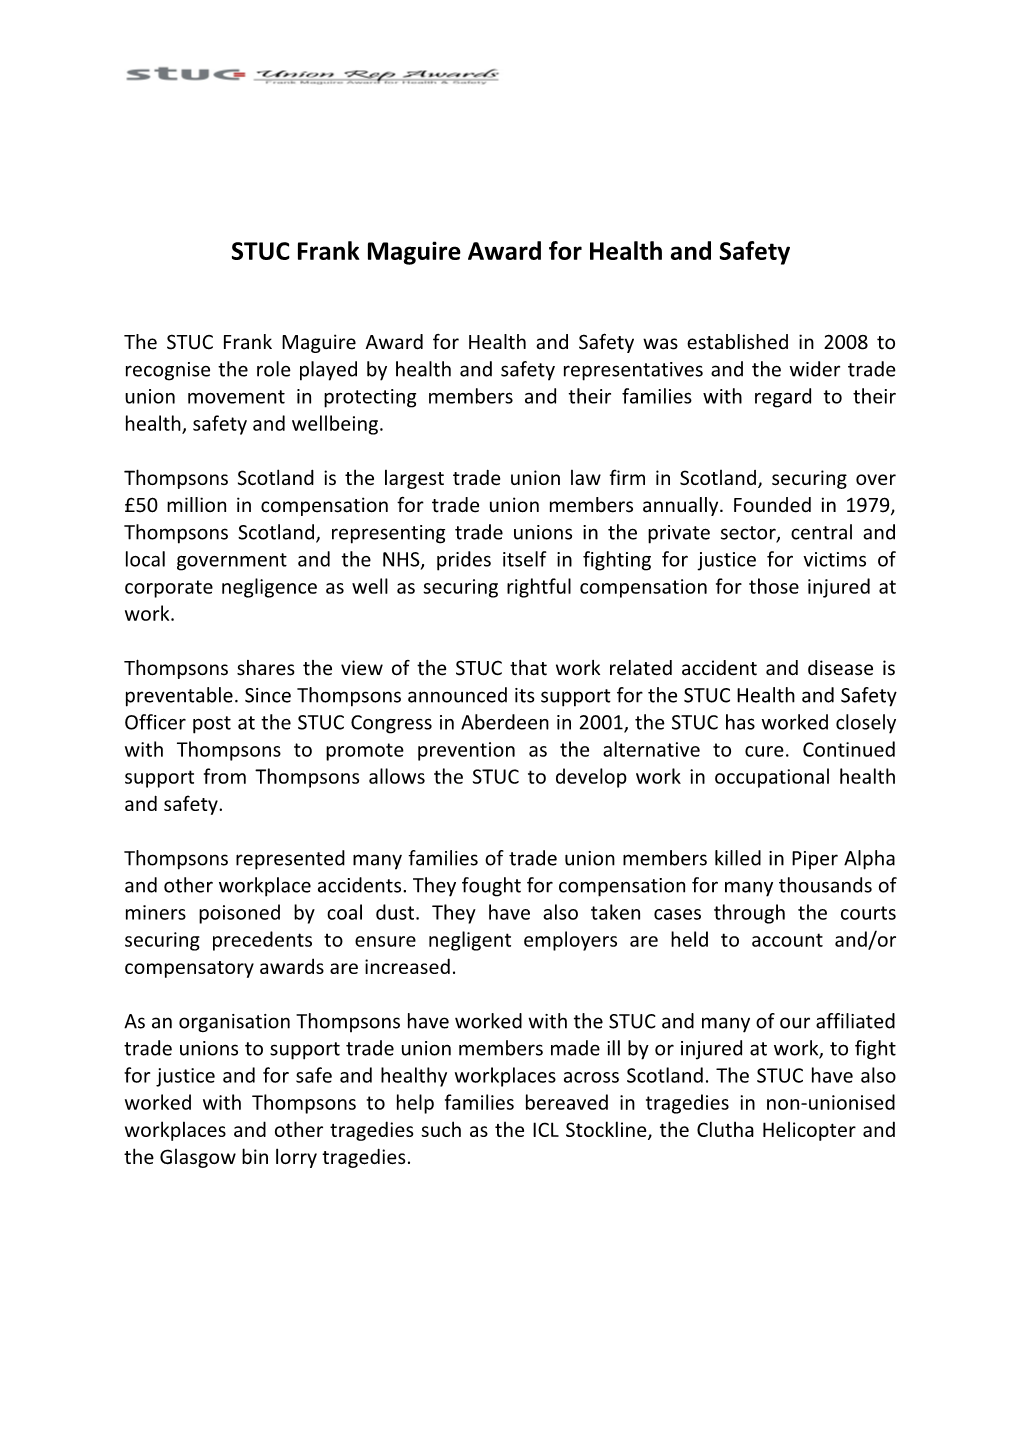 STUC Frank Maguire Award for Health and Safety